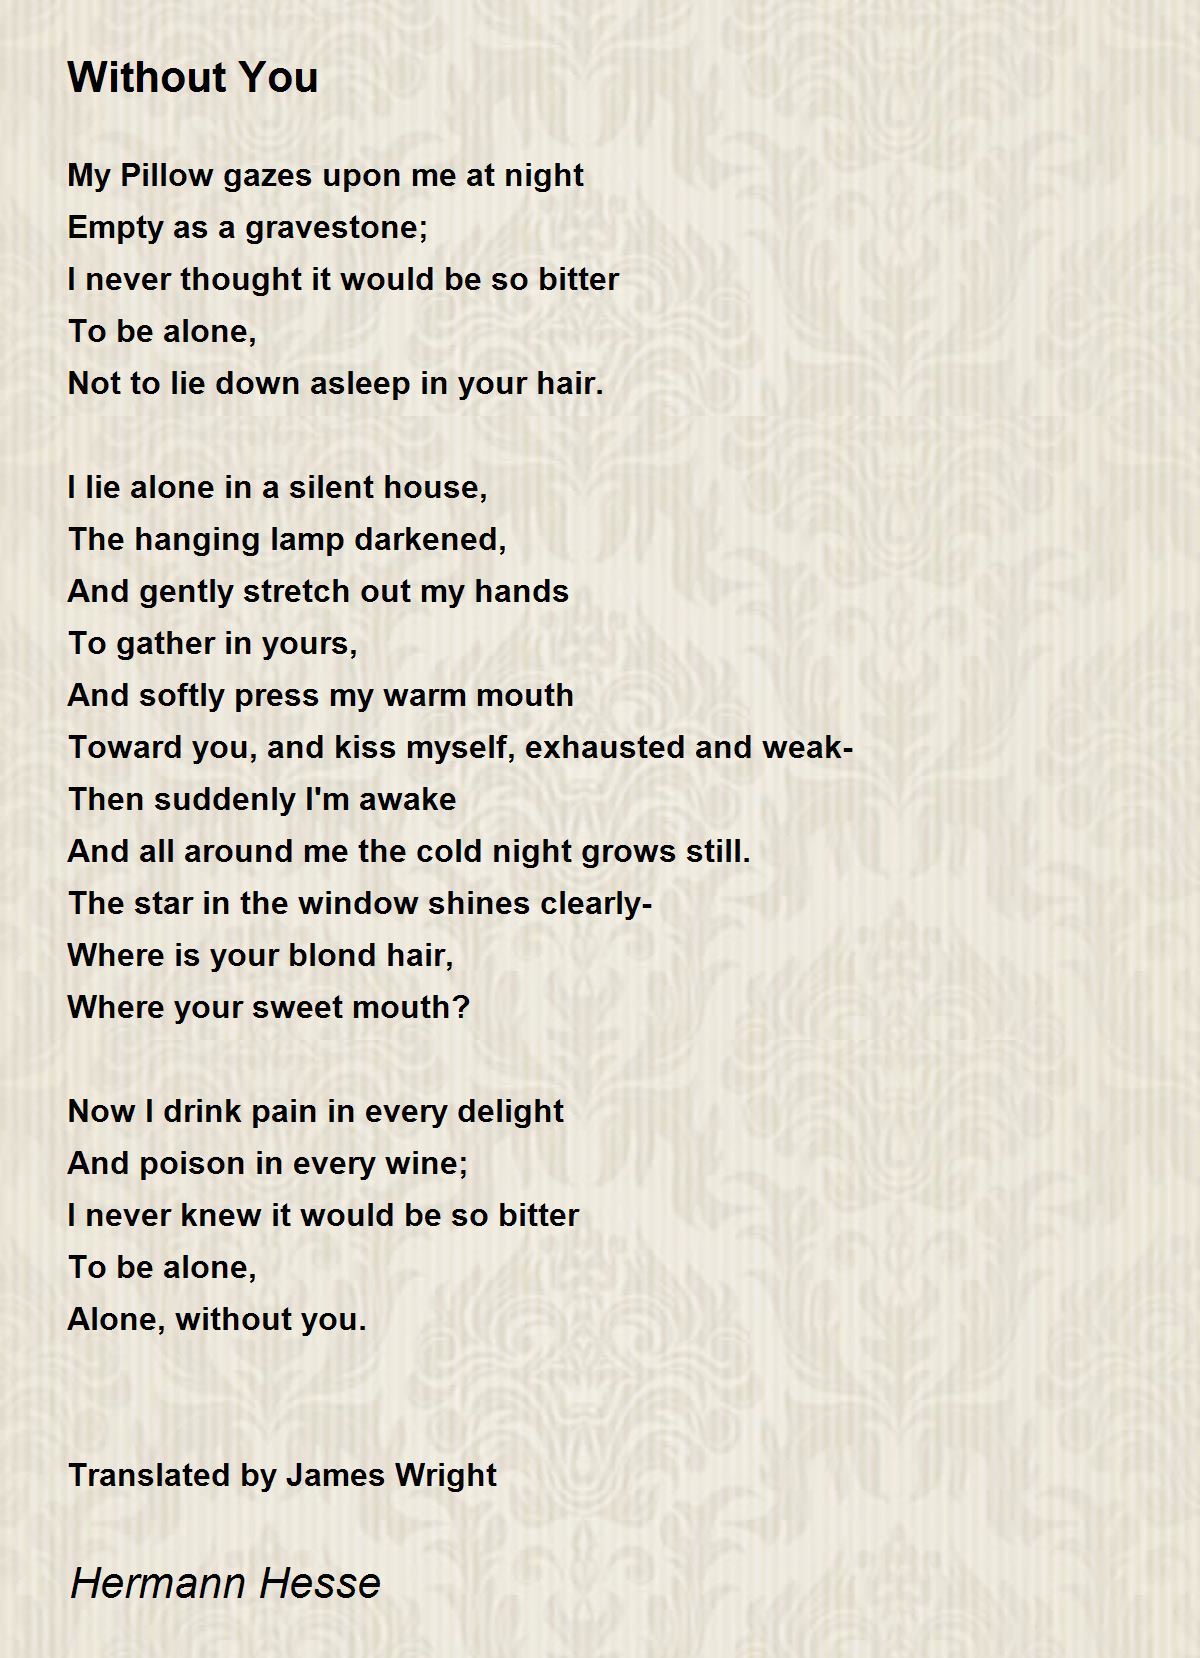 Without You Poem by Hermann Hesse - Poem Hunter Comments